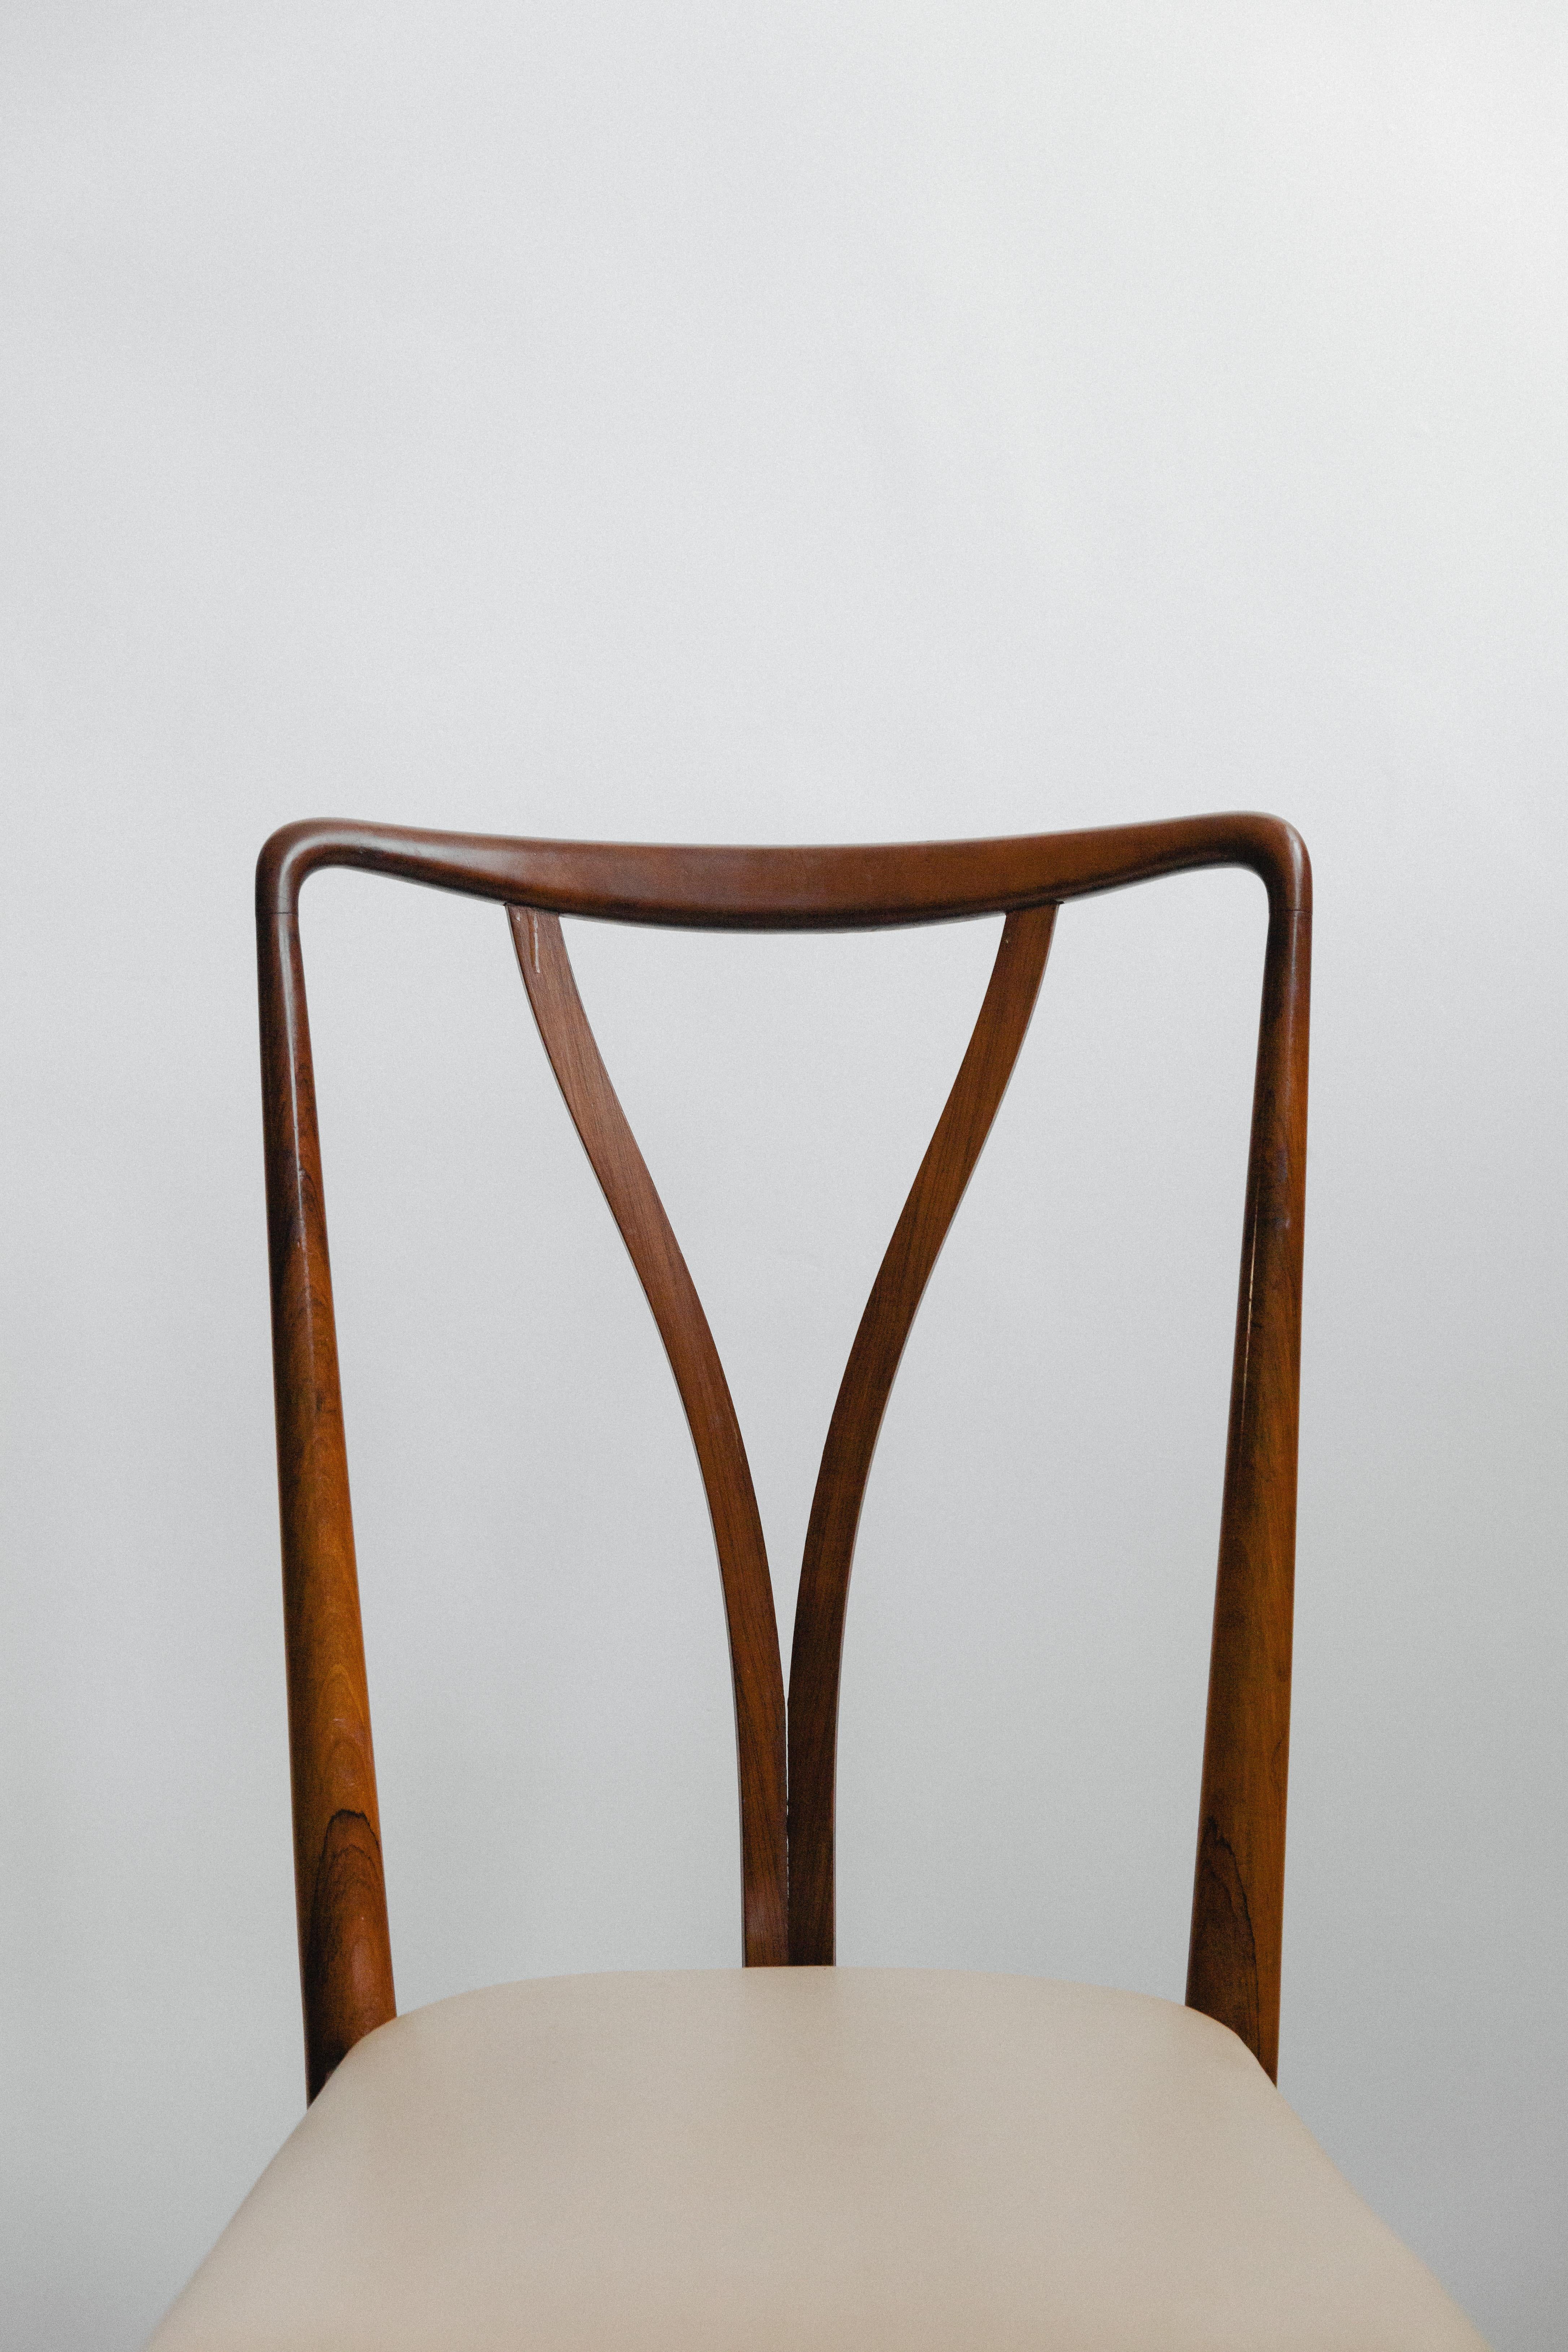 Mid-Century Modern Rosewood Dining Chair, Giuseppe Scapinelli, Brazilian Midcentury, 1950s